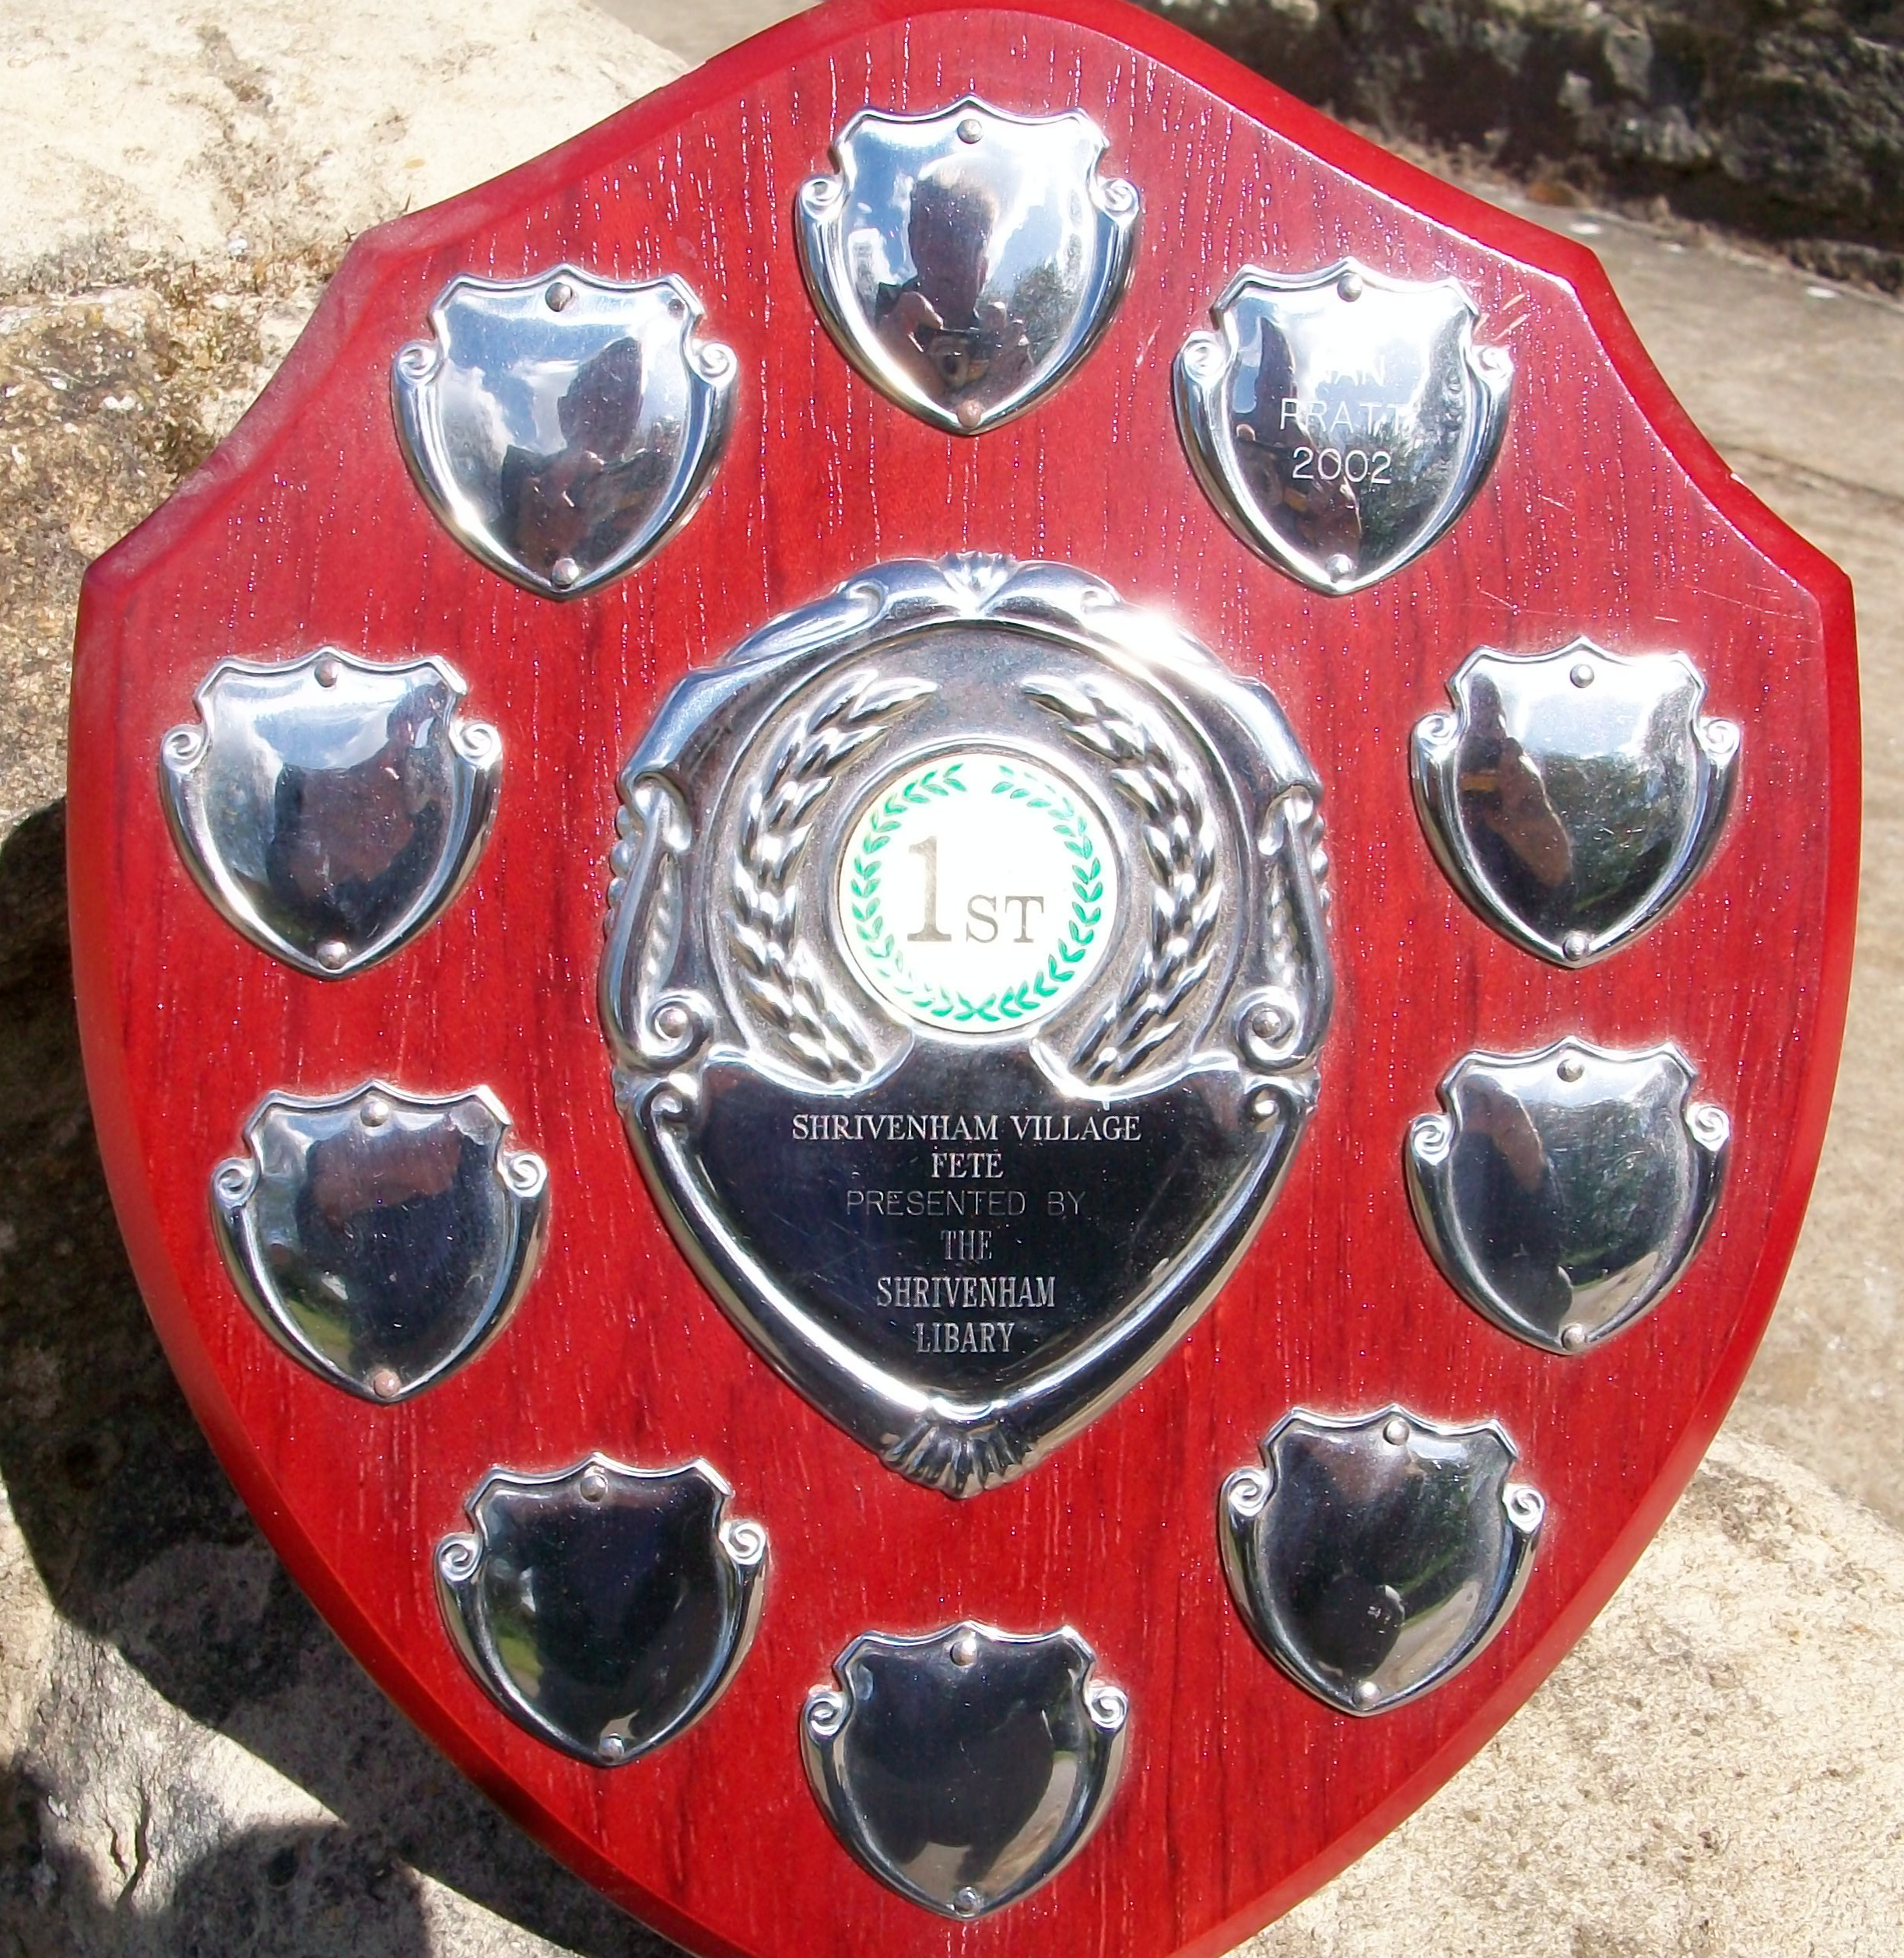 The Library Trophy